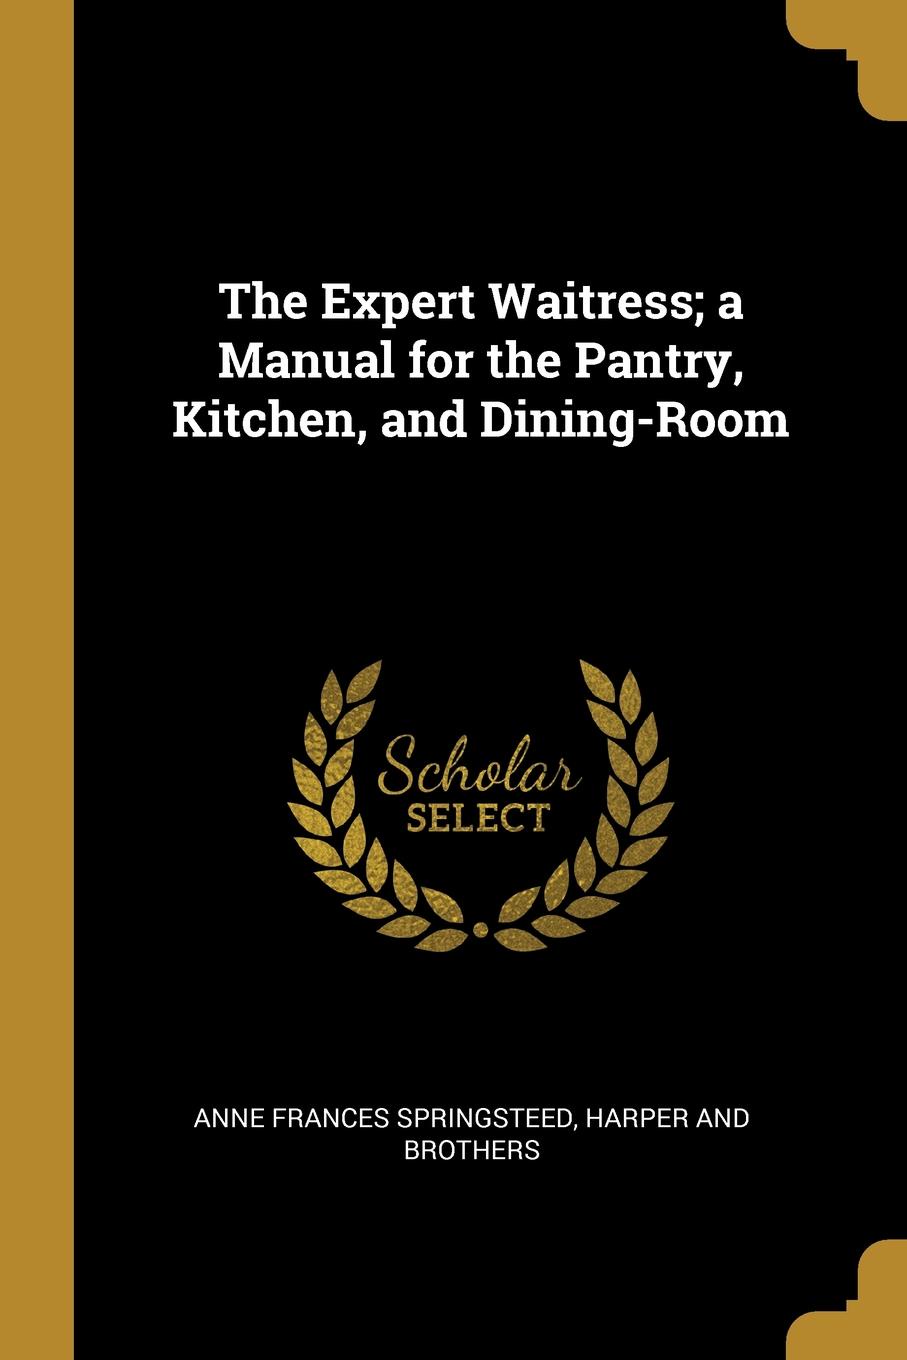 The Expert Waitress; a Manual for the Pantry, Kitchen, and Dining-Room